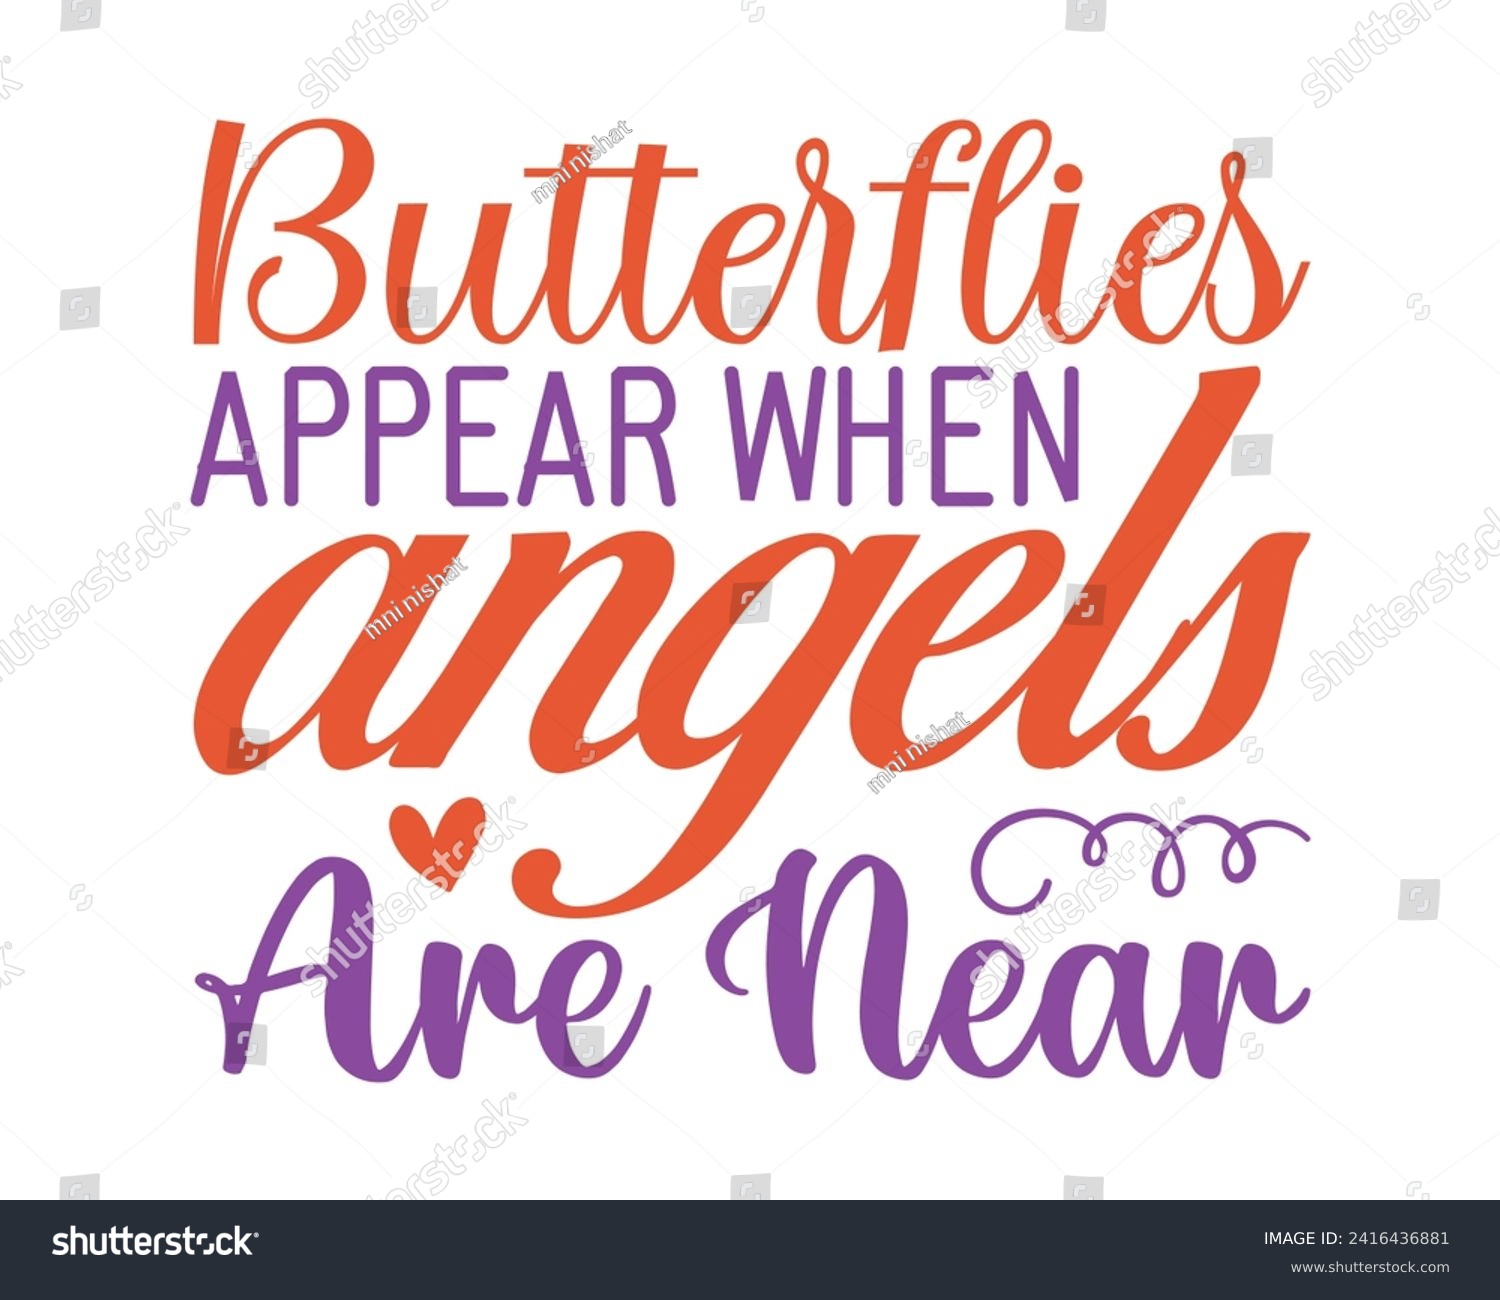 SVG of butterflies appear when angels are near svg